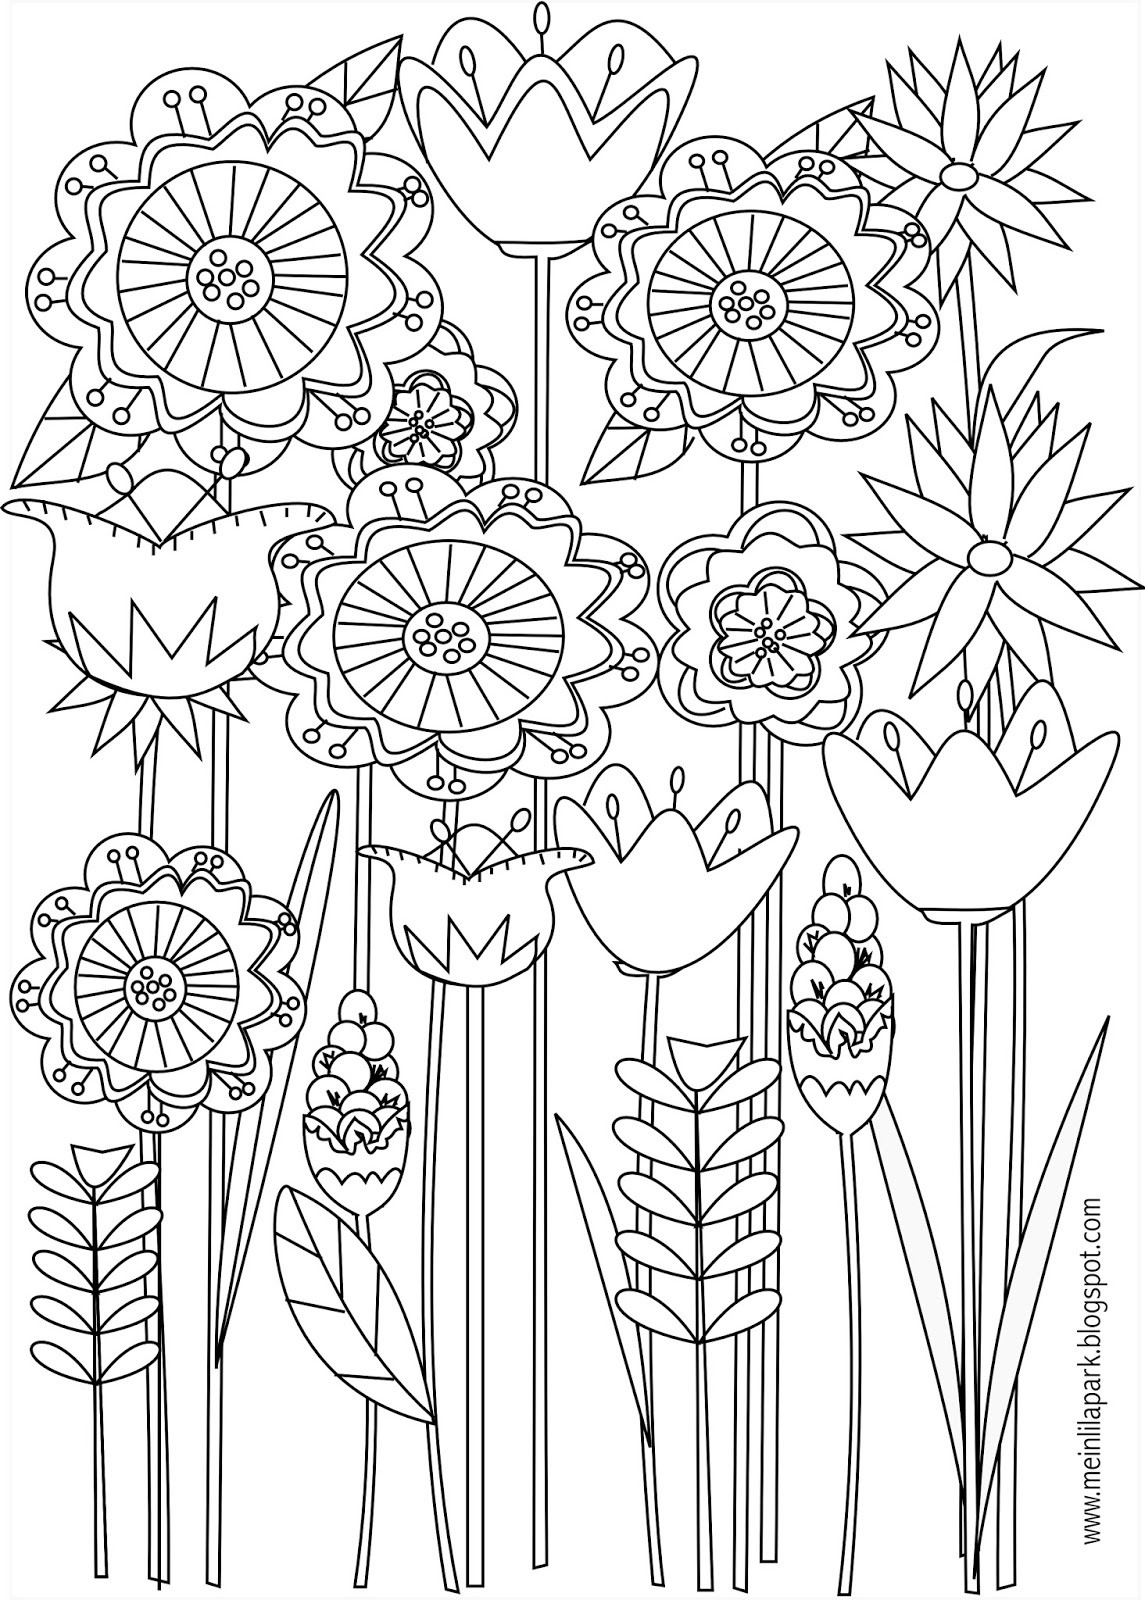 Printable Spring Coloring Pages
 Free printable spring coloring pages Ausmalbilder